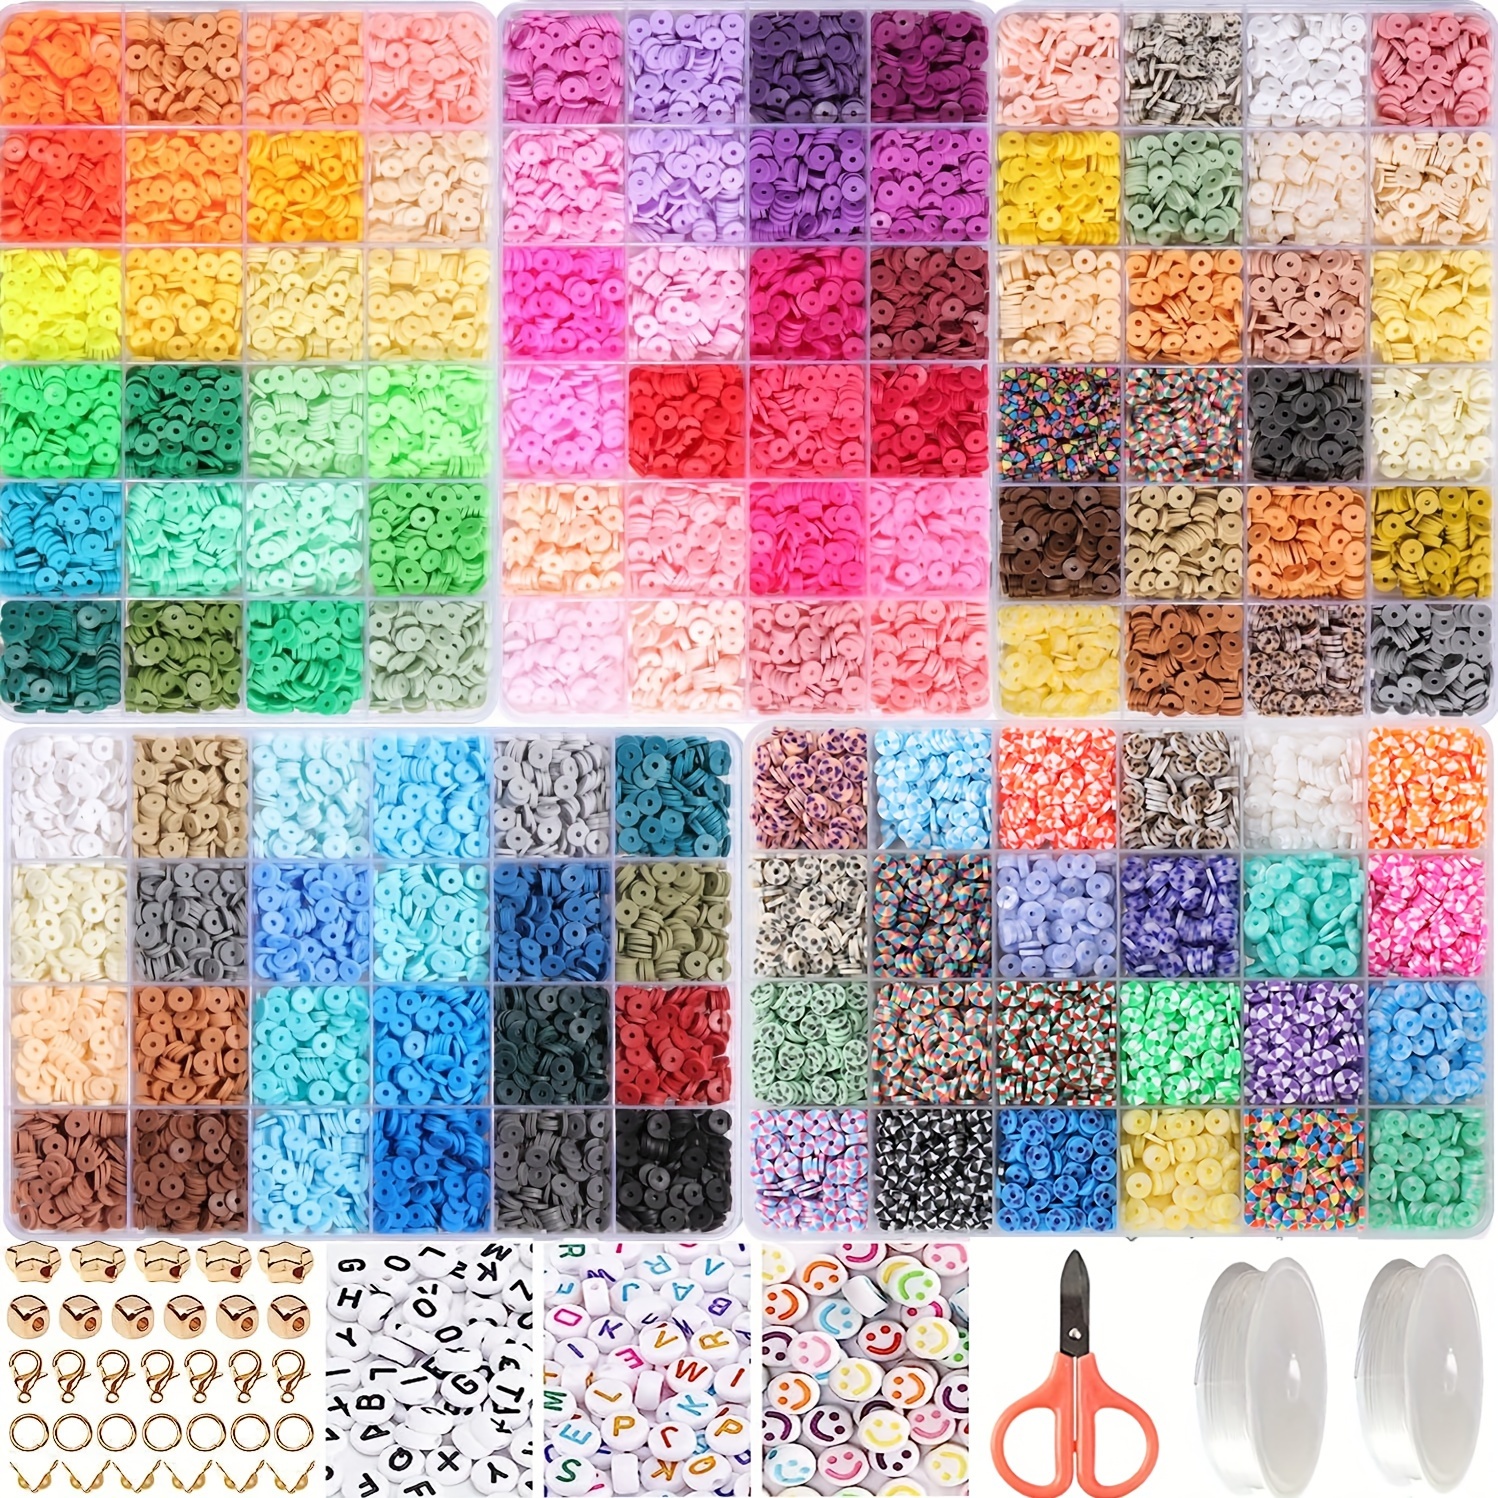  QUEFE Clay Beads Kit, 16800pcs, 168 Colors, Polymer Heishi  Beads, Clay Bead Bracelet Kit, Charm Set Jewelry Making, DIY Craft Gifts :  Arts, Crafts & Sewing